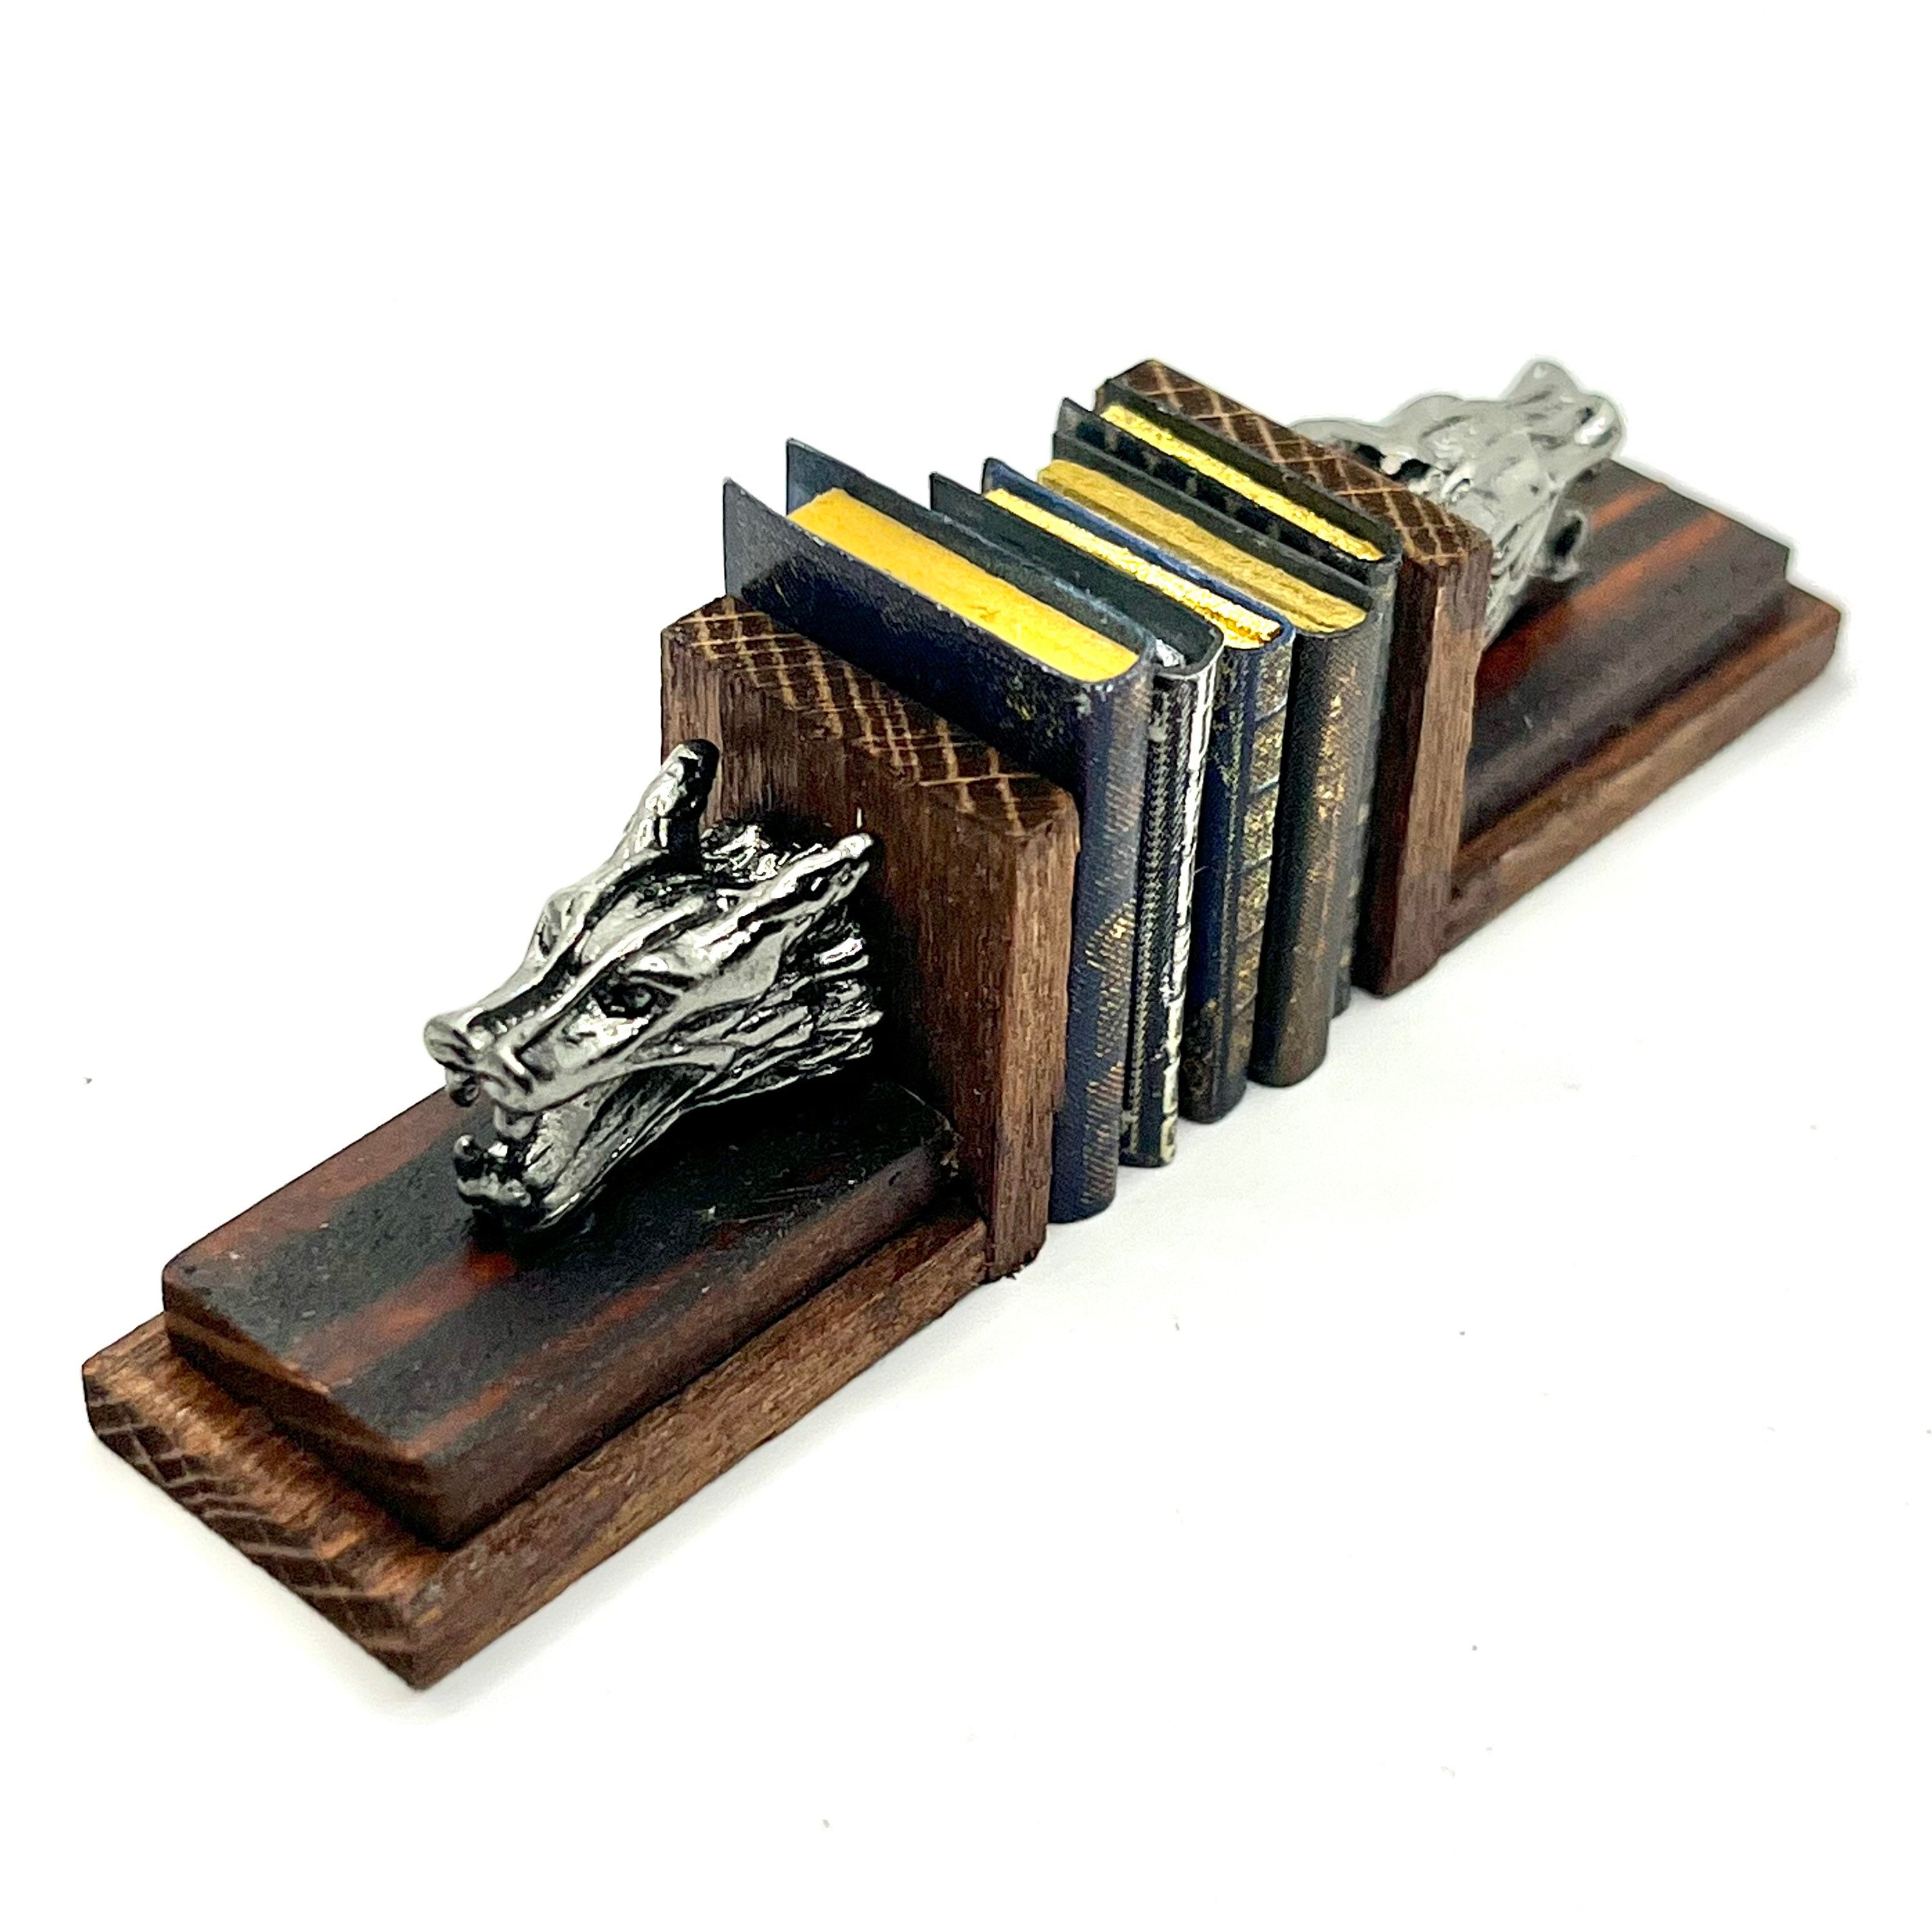 GAME OF THRONES 5 Miniature Books 1:12 Dollhouse Scale A SONG OF ICE AND FIRE 